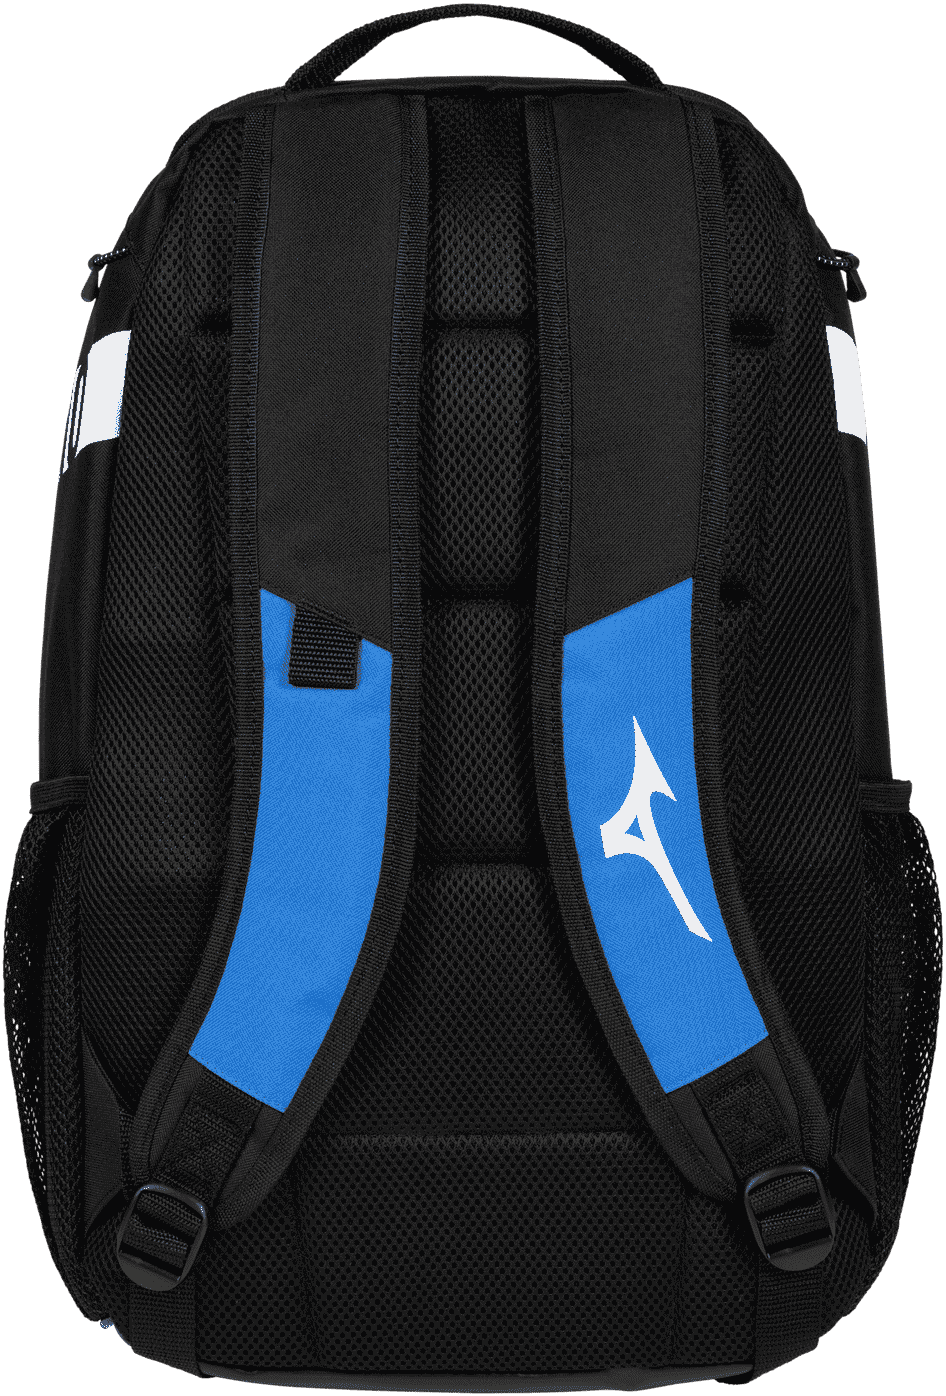 Mizuno Crossover Backpack 22 - Royal Black - HIT a Double